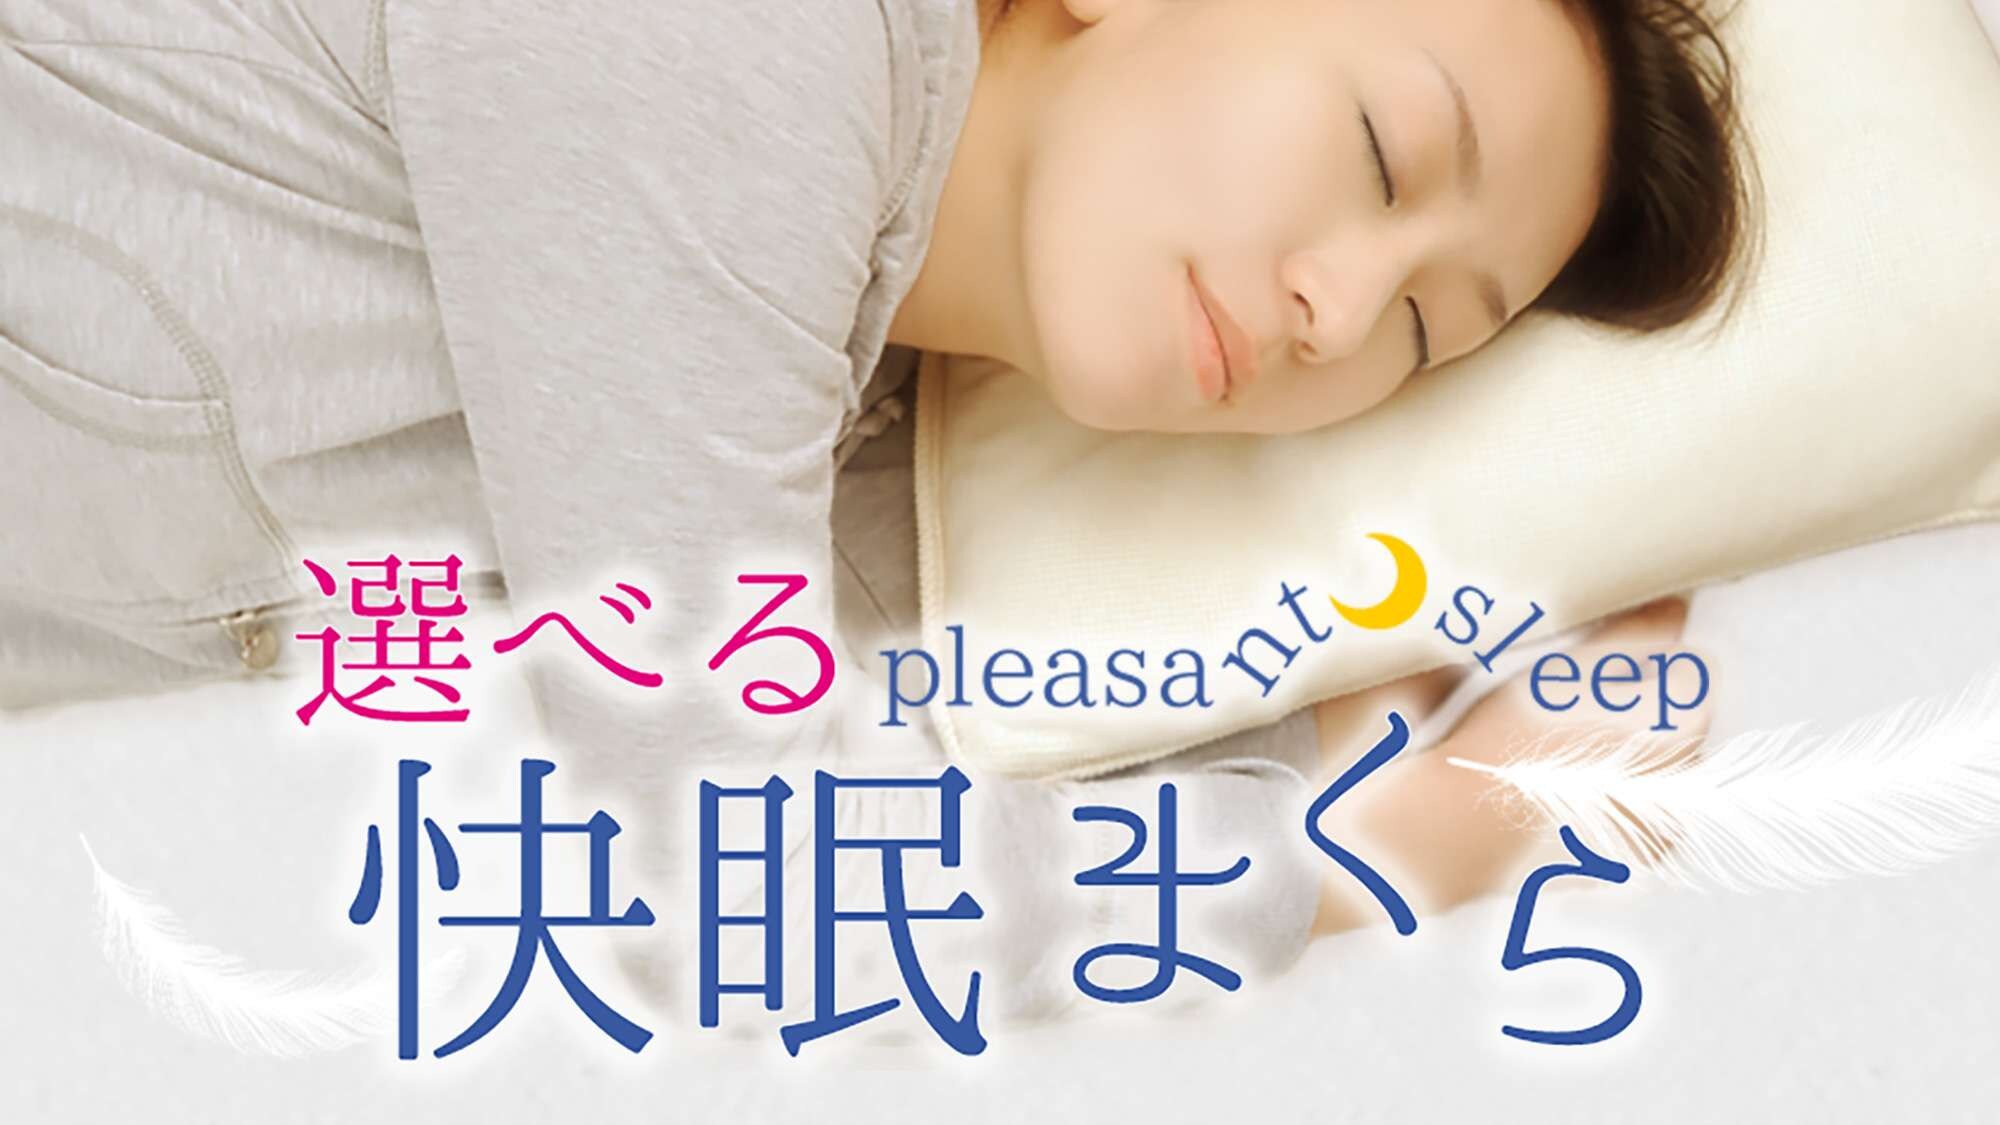 A good night's sleep pillow to choose from